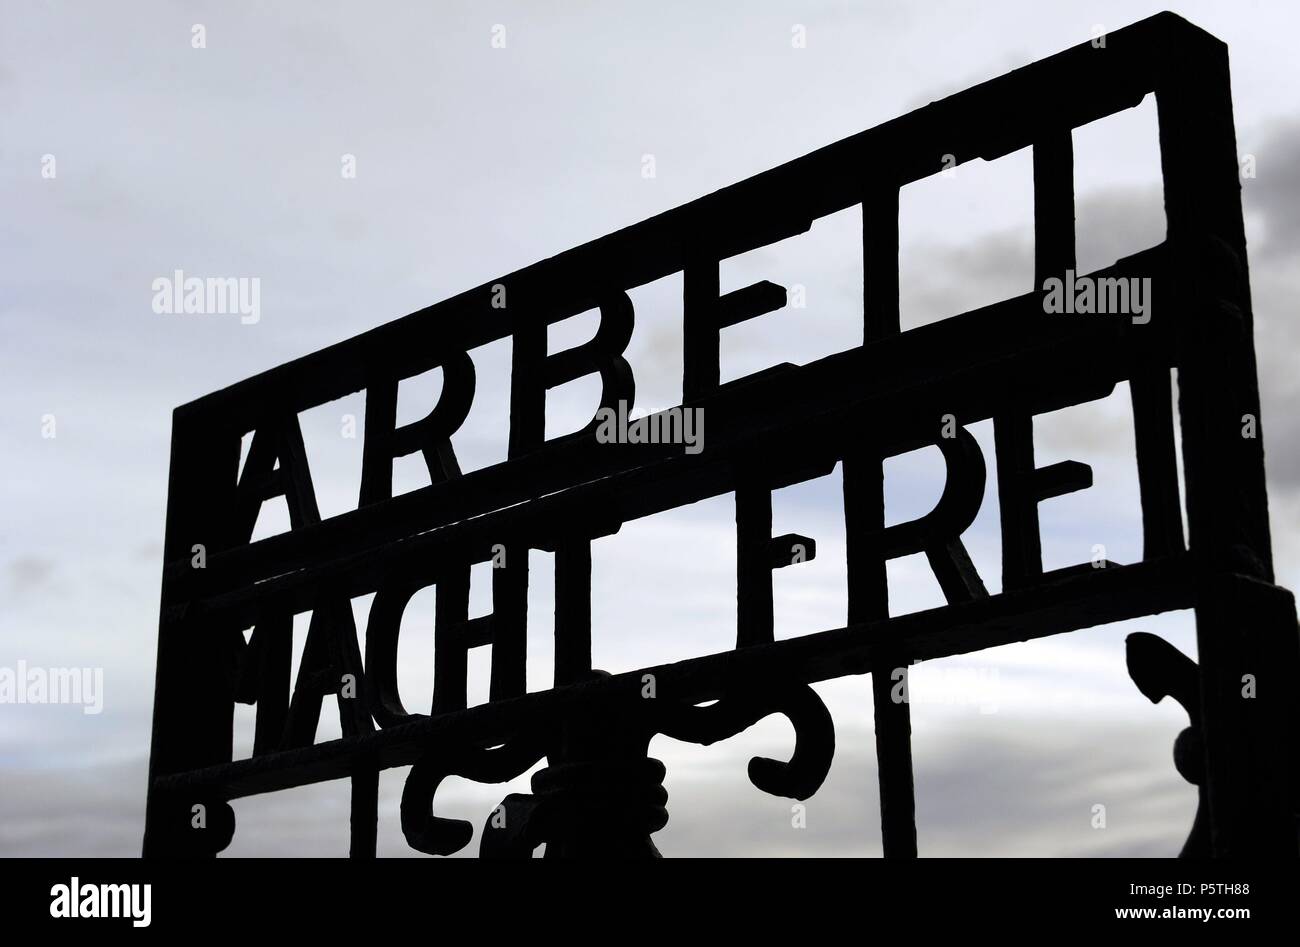 Dachau Concentration Camp. Nazi camp of prisoners opened in 1933. Detail of the slogan Arbeit macht frei (Labour makes free) at the main door. Germany. Stock Photo